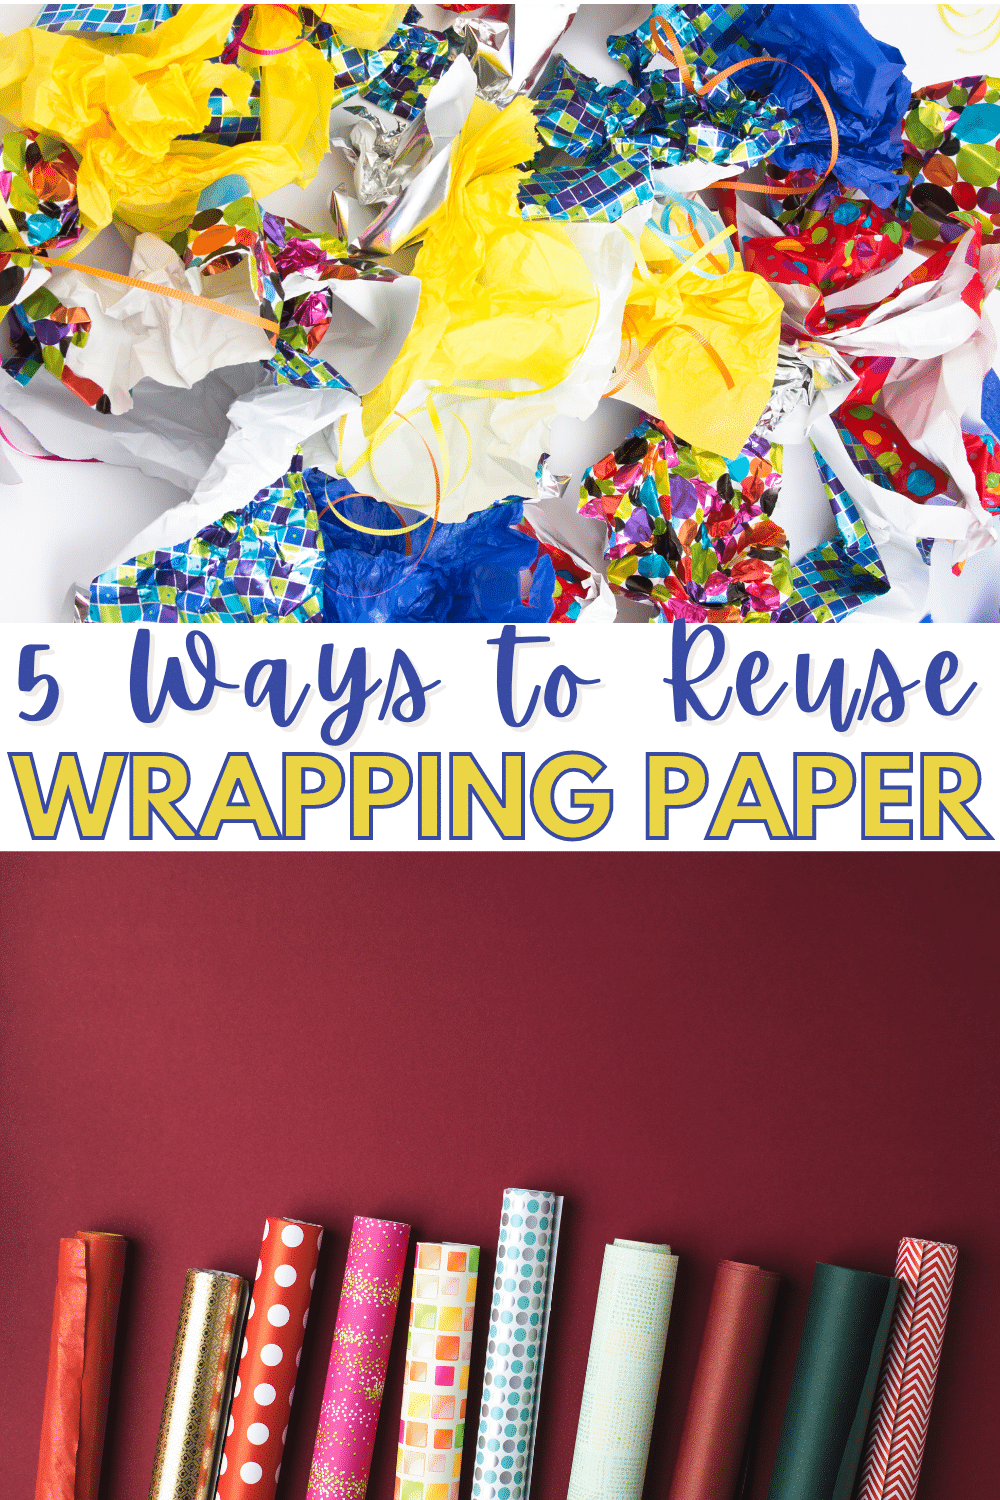 Don't throw that leftover wrapping paper away! Before you toss it in the recycling bin, try one of these clever uses for wrapping paper. #repurpose #upcycle #newusesoldthings via @wondermomwannab